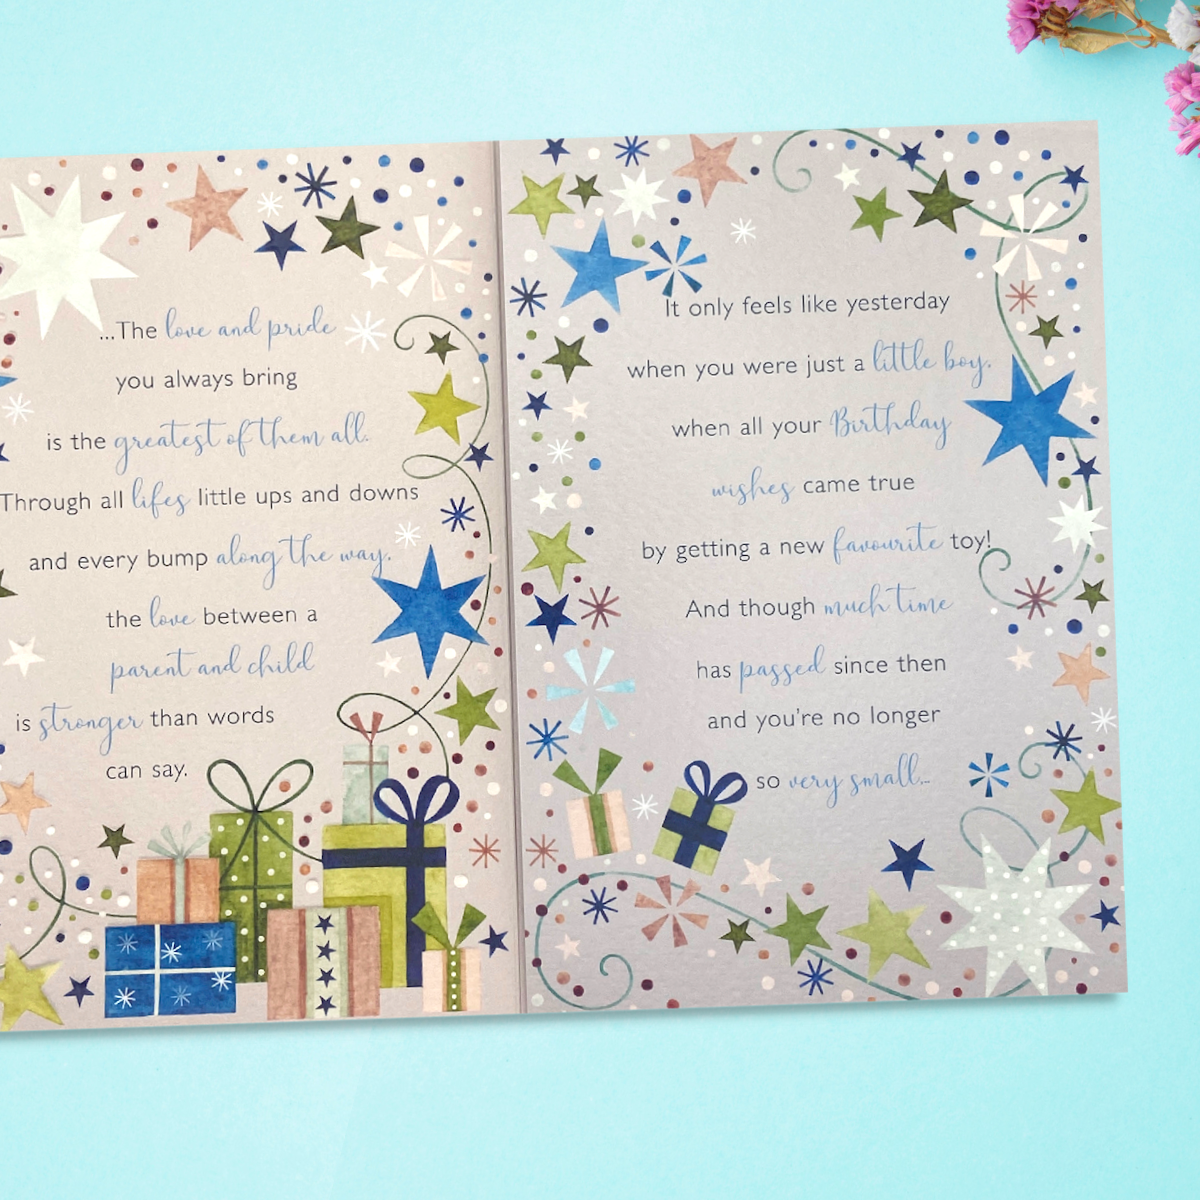 Two further pages with heartfelt verse surrounded by stars and gifts